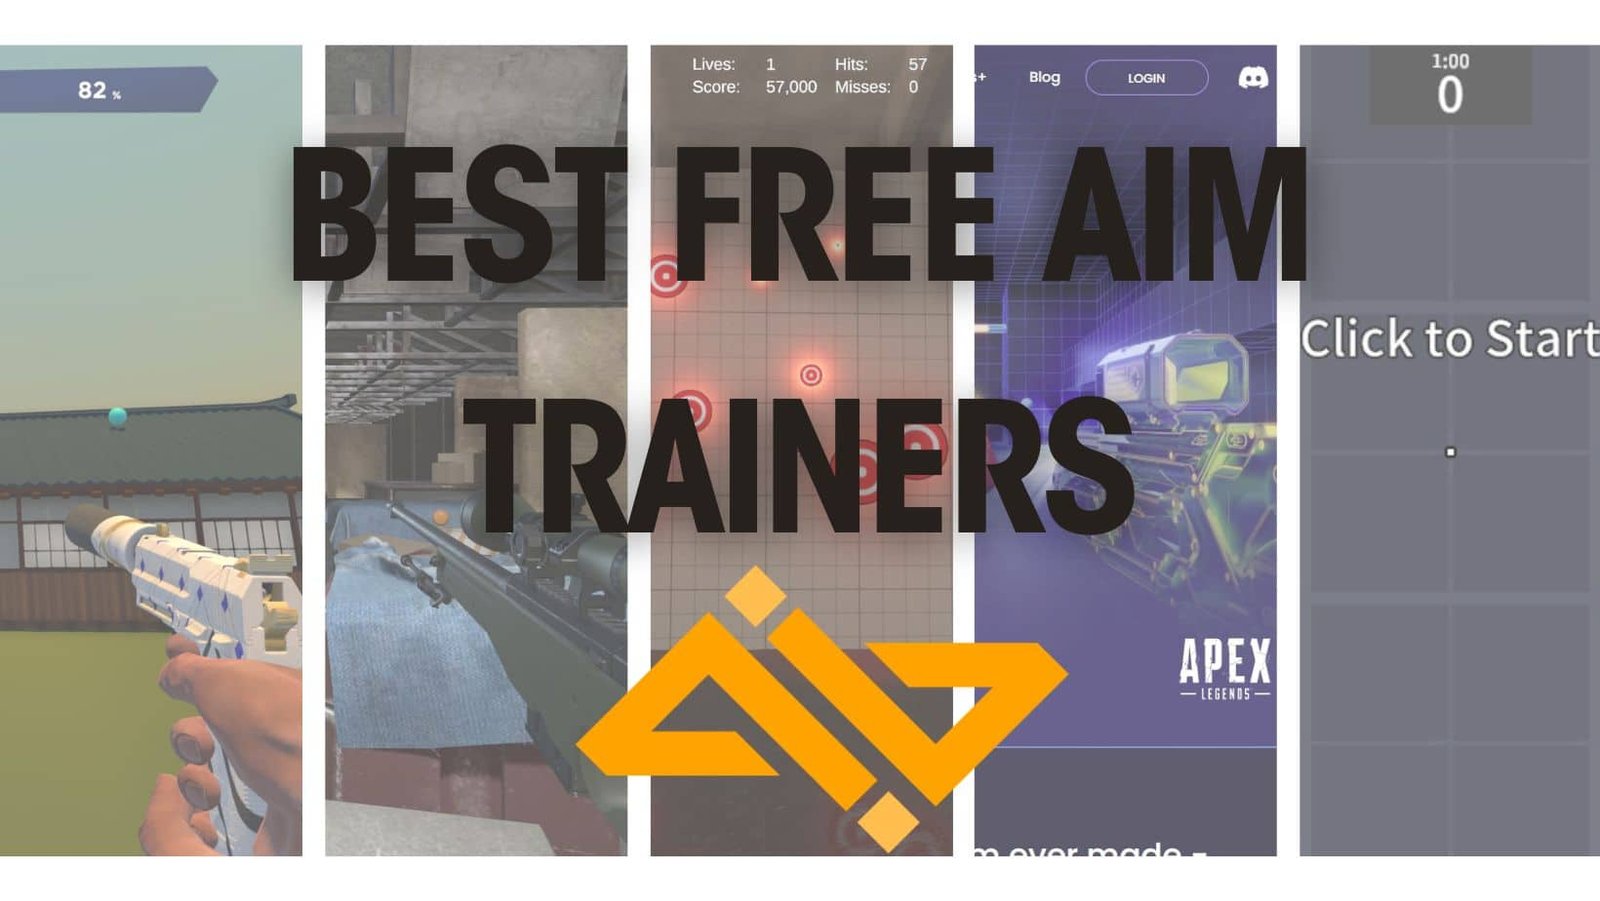 10 Best Free Aim Trainers of 2023 – Train Like a Pro For Free